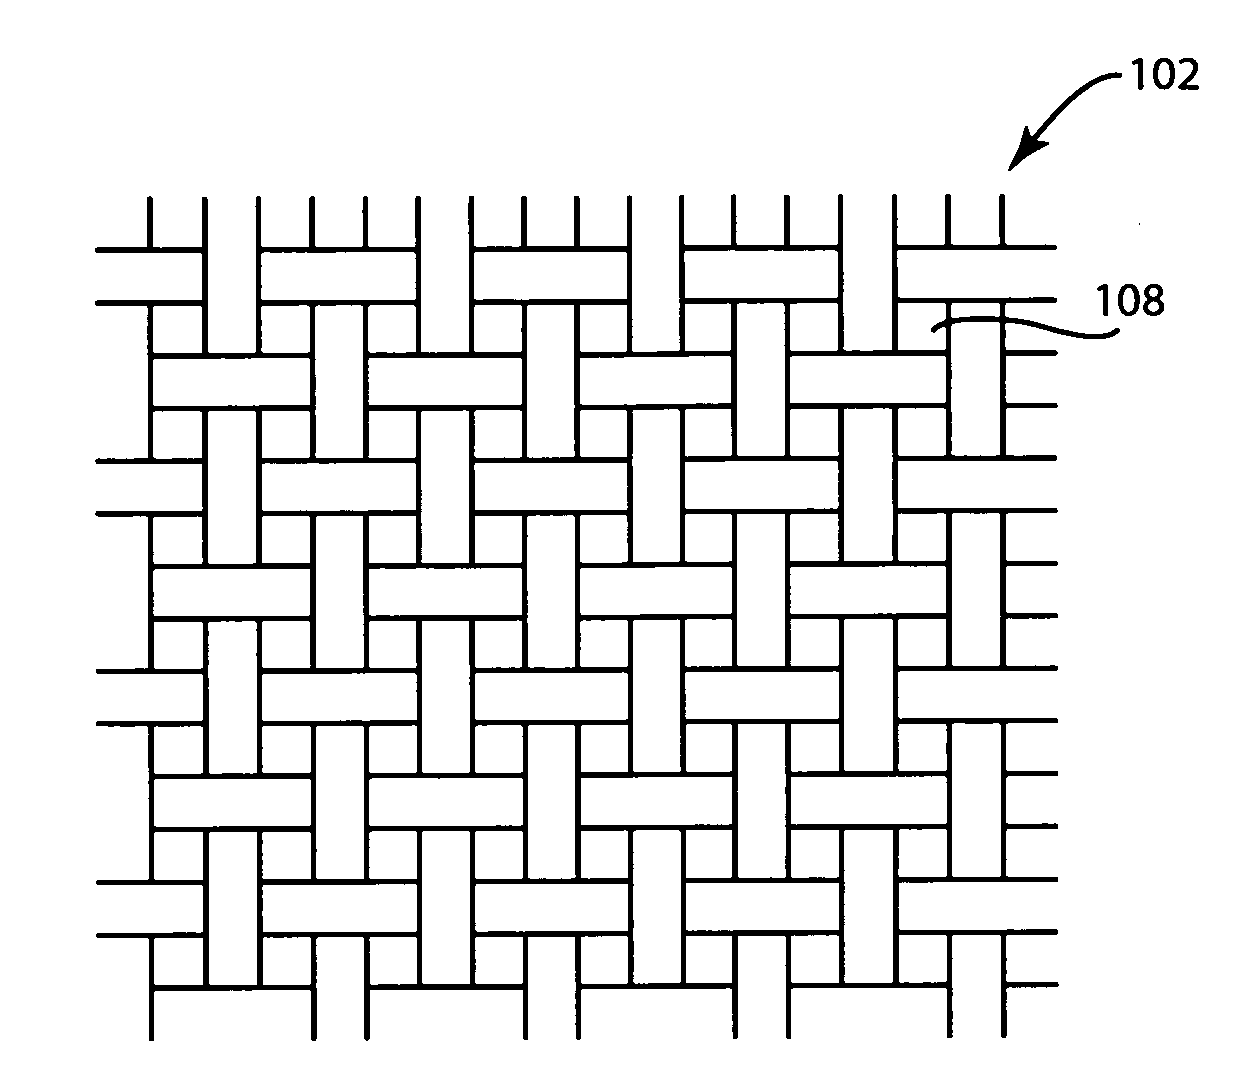 Porous substrates, articles, systems and compositions comprising nanofibers and methods of their use and production